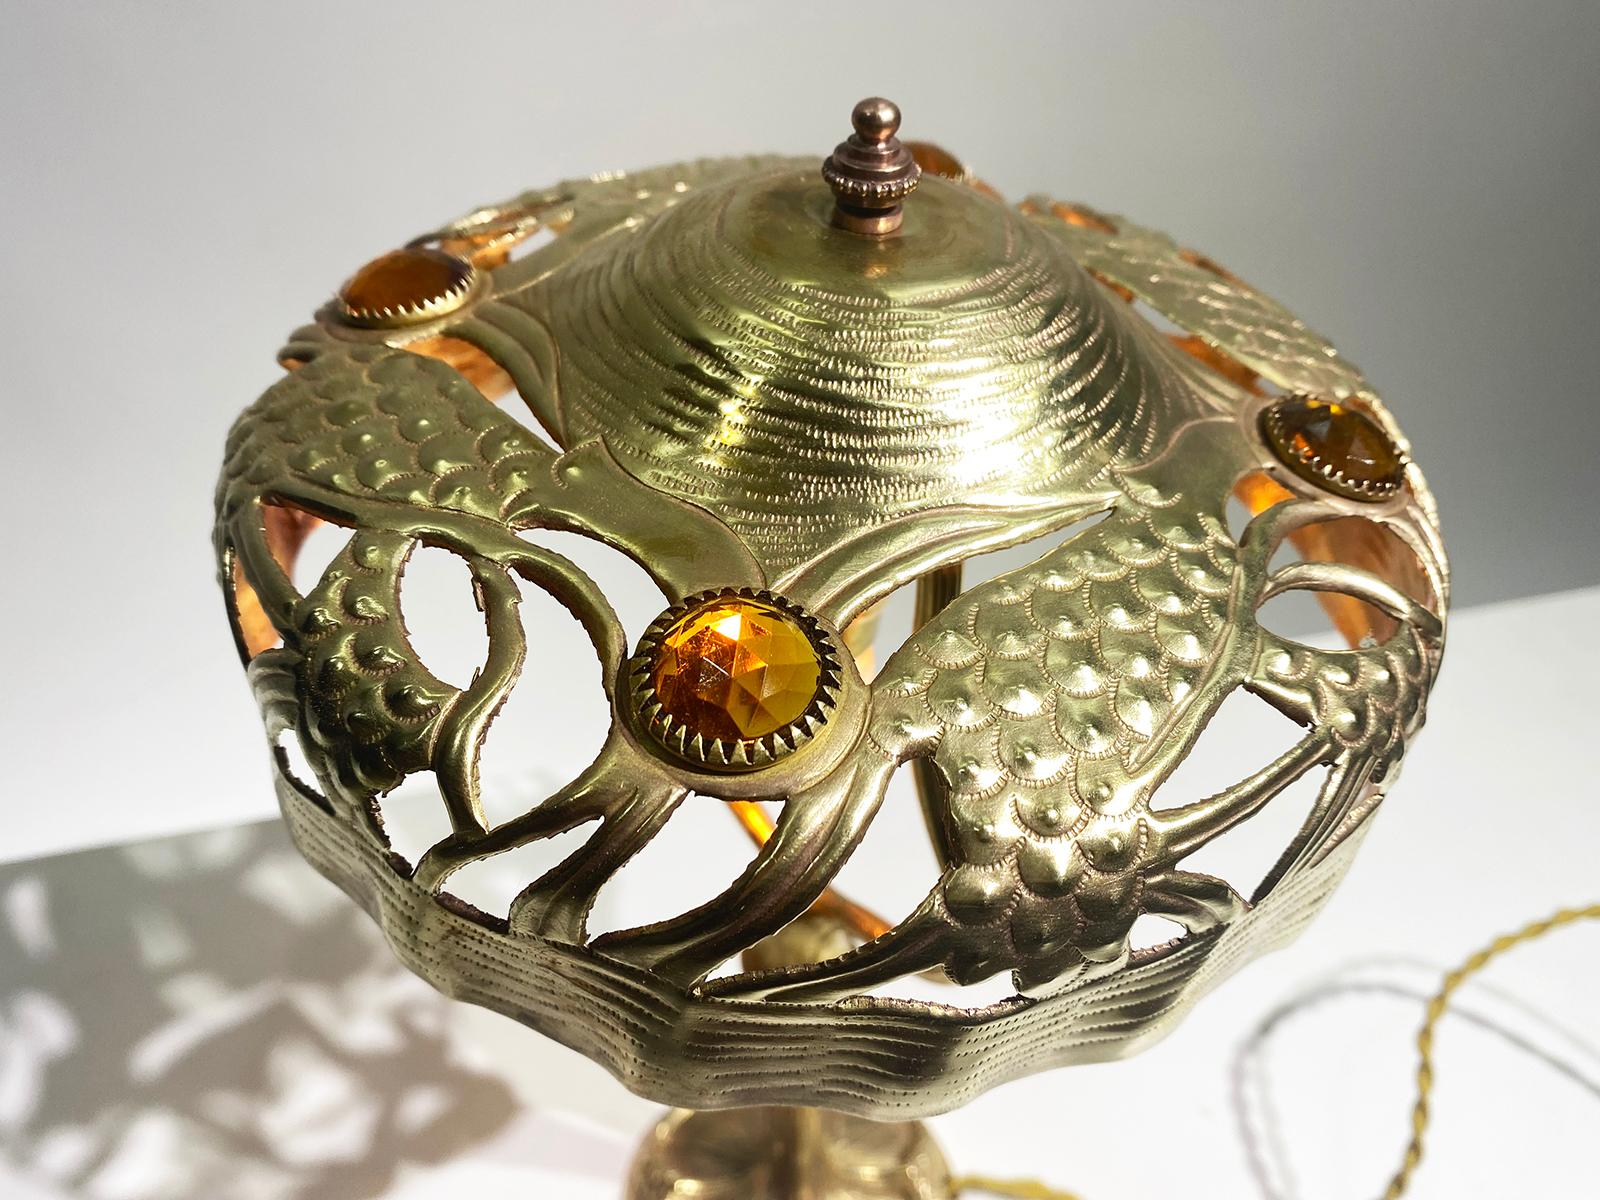 Beautiful and unique Art Nouveau table lamp, early 20th century, signed GEORGES LELEU (1883-1961),
Foot and lampshade in brass, decorated with stylized pine and orange stones, Circa 1910. 
Signed G. LELEU on the base of the foot.
Can be delivered